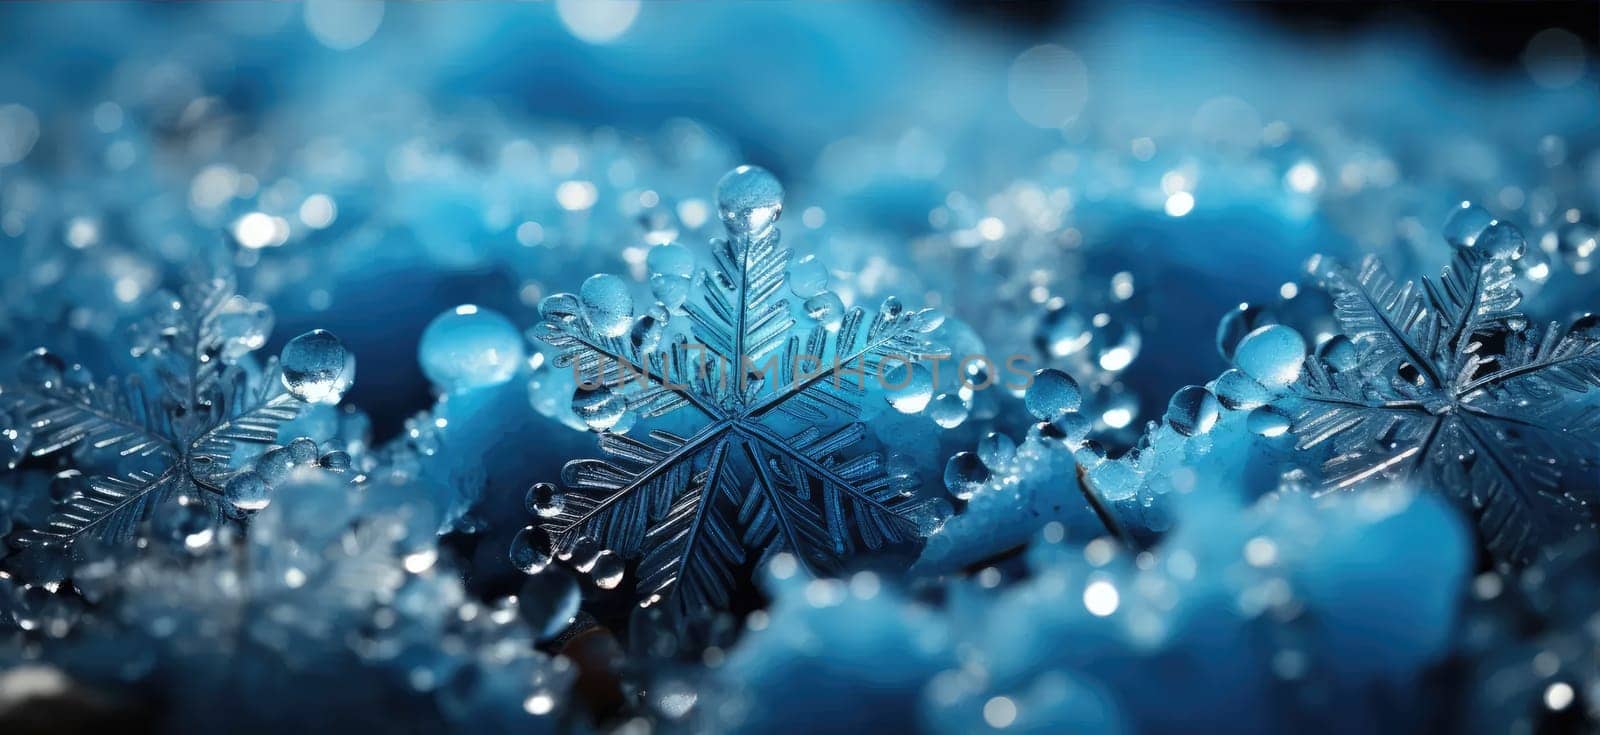 Winter magic on blue christmas background with swirling snowflakes.